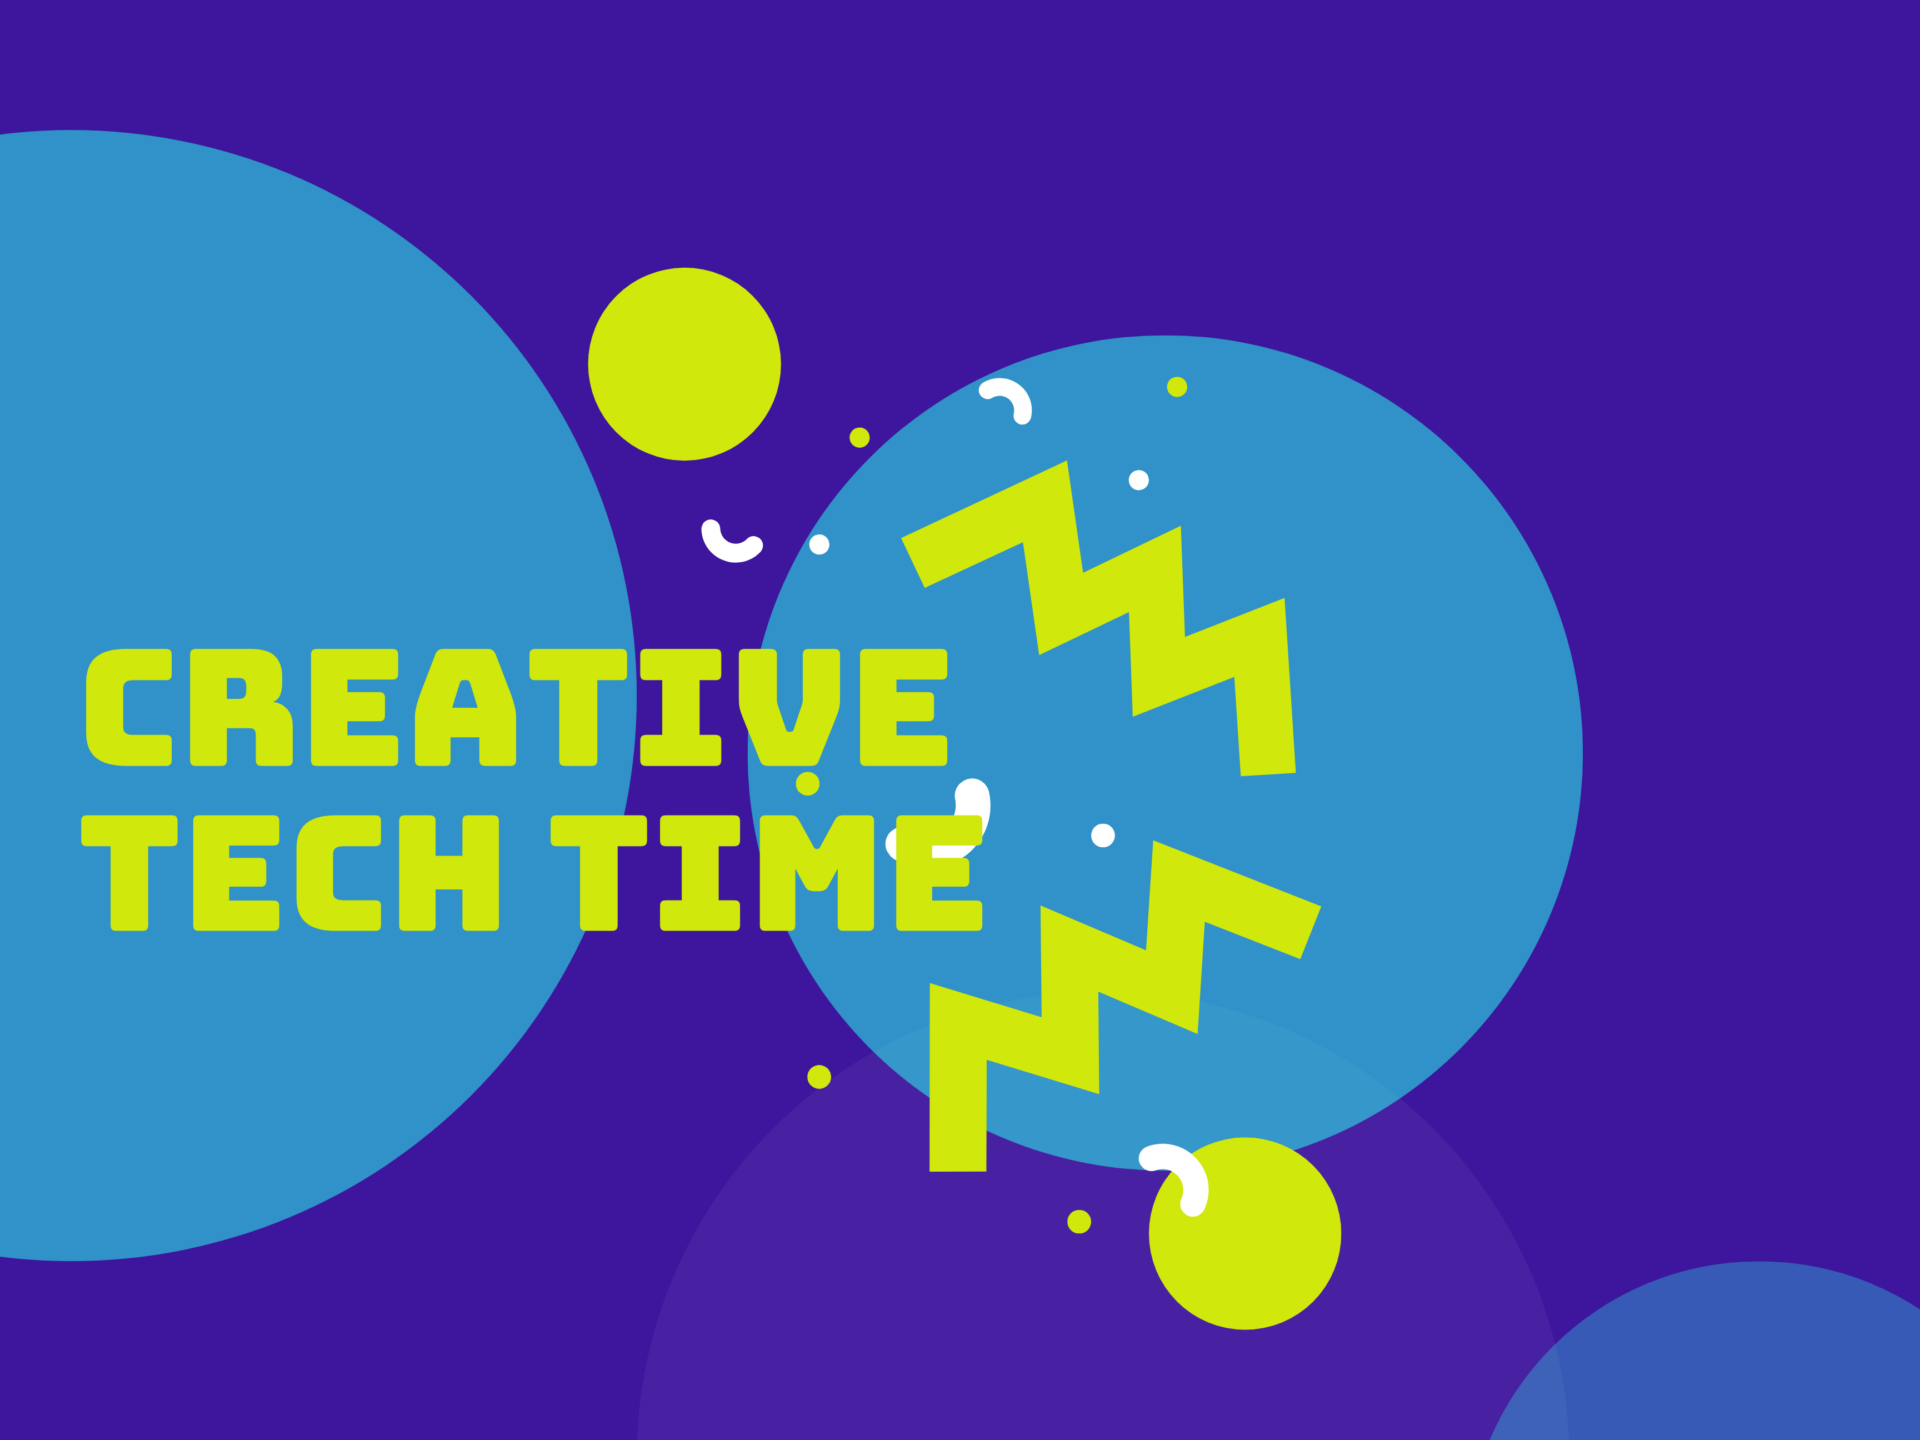 Image of Creative Tech Time event